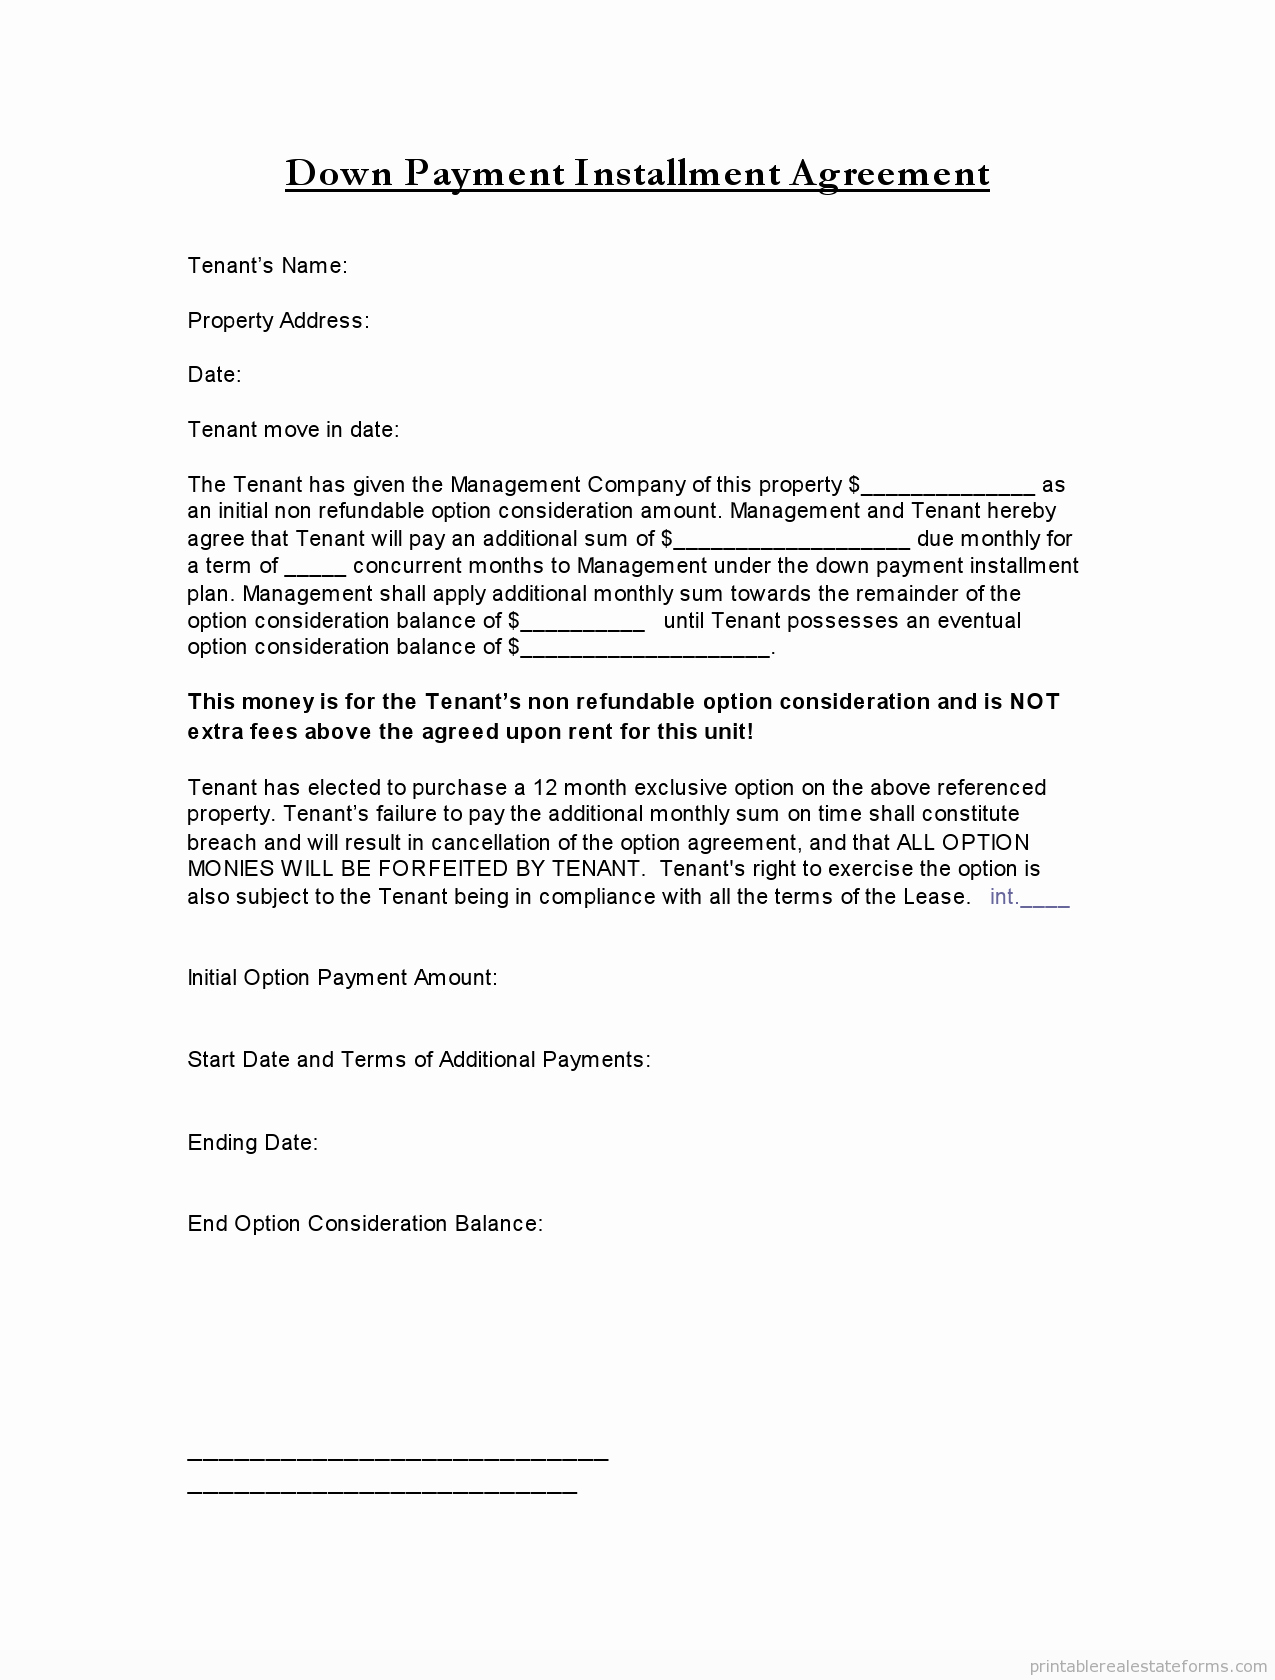 Installment Payment Agreement Template Awesome Sample Printable Down Payment Installment Agreement 2 form